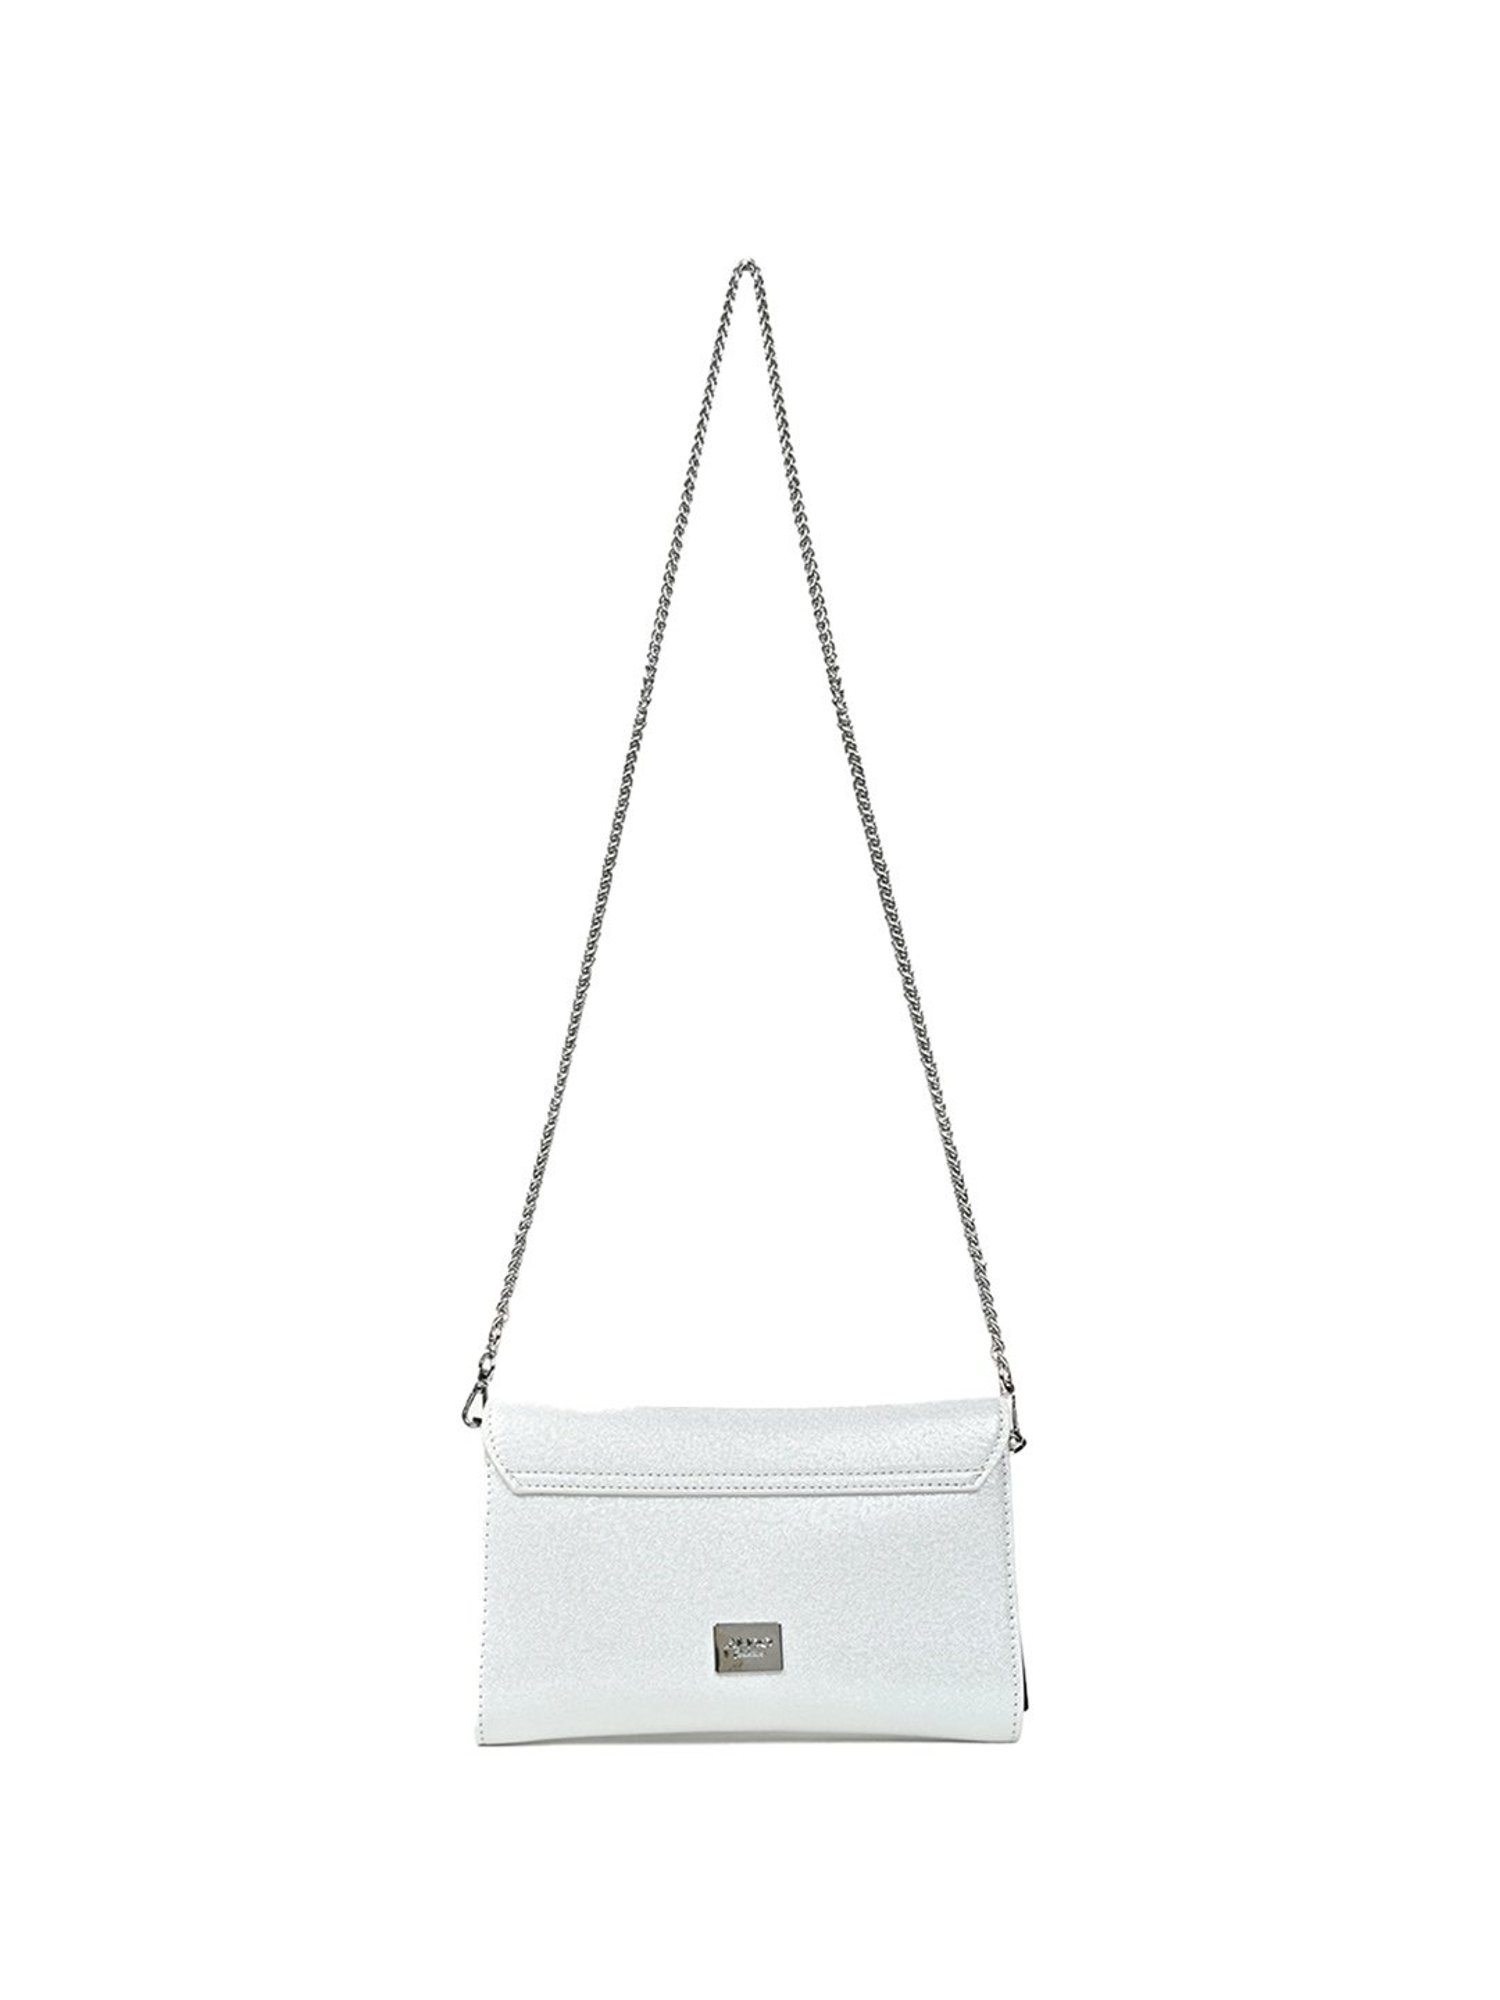 Buy Aldo CLEEO040 Silver Solid Clutch Online At Best Price @ Tata CLiQ